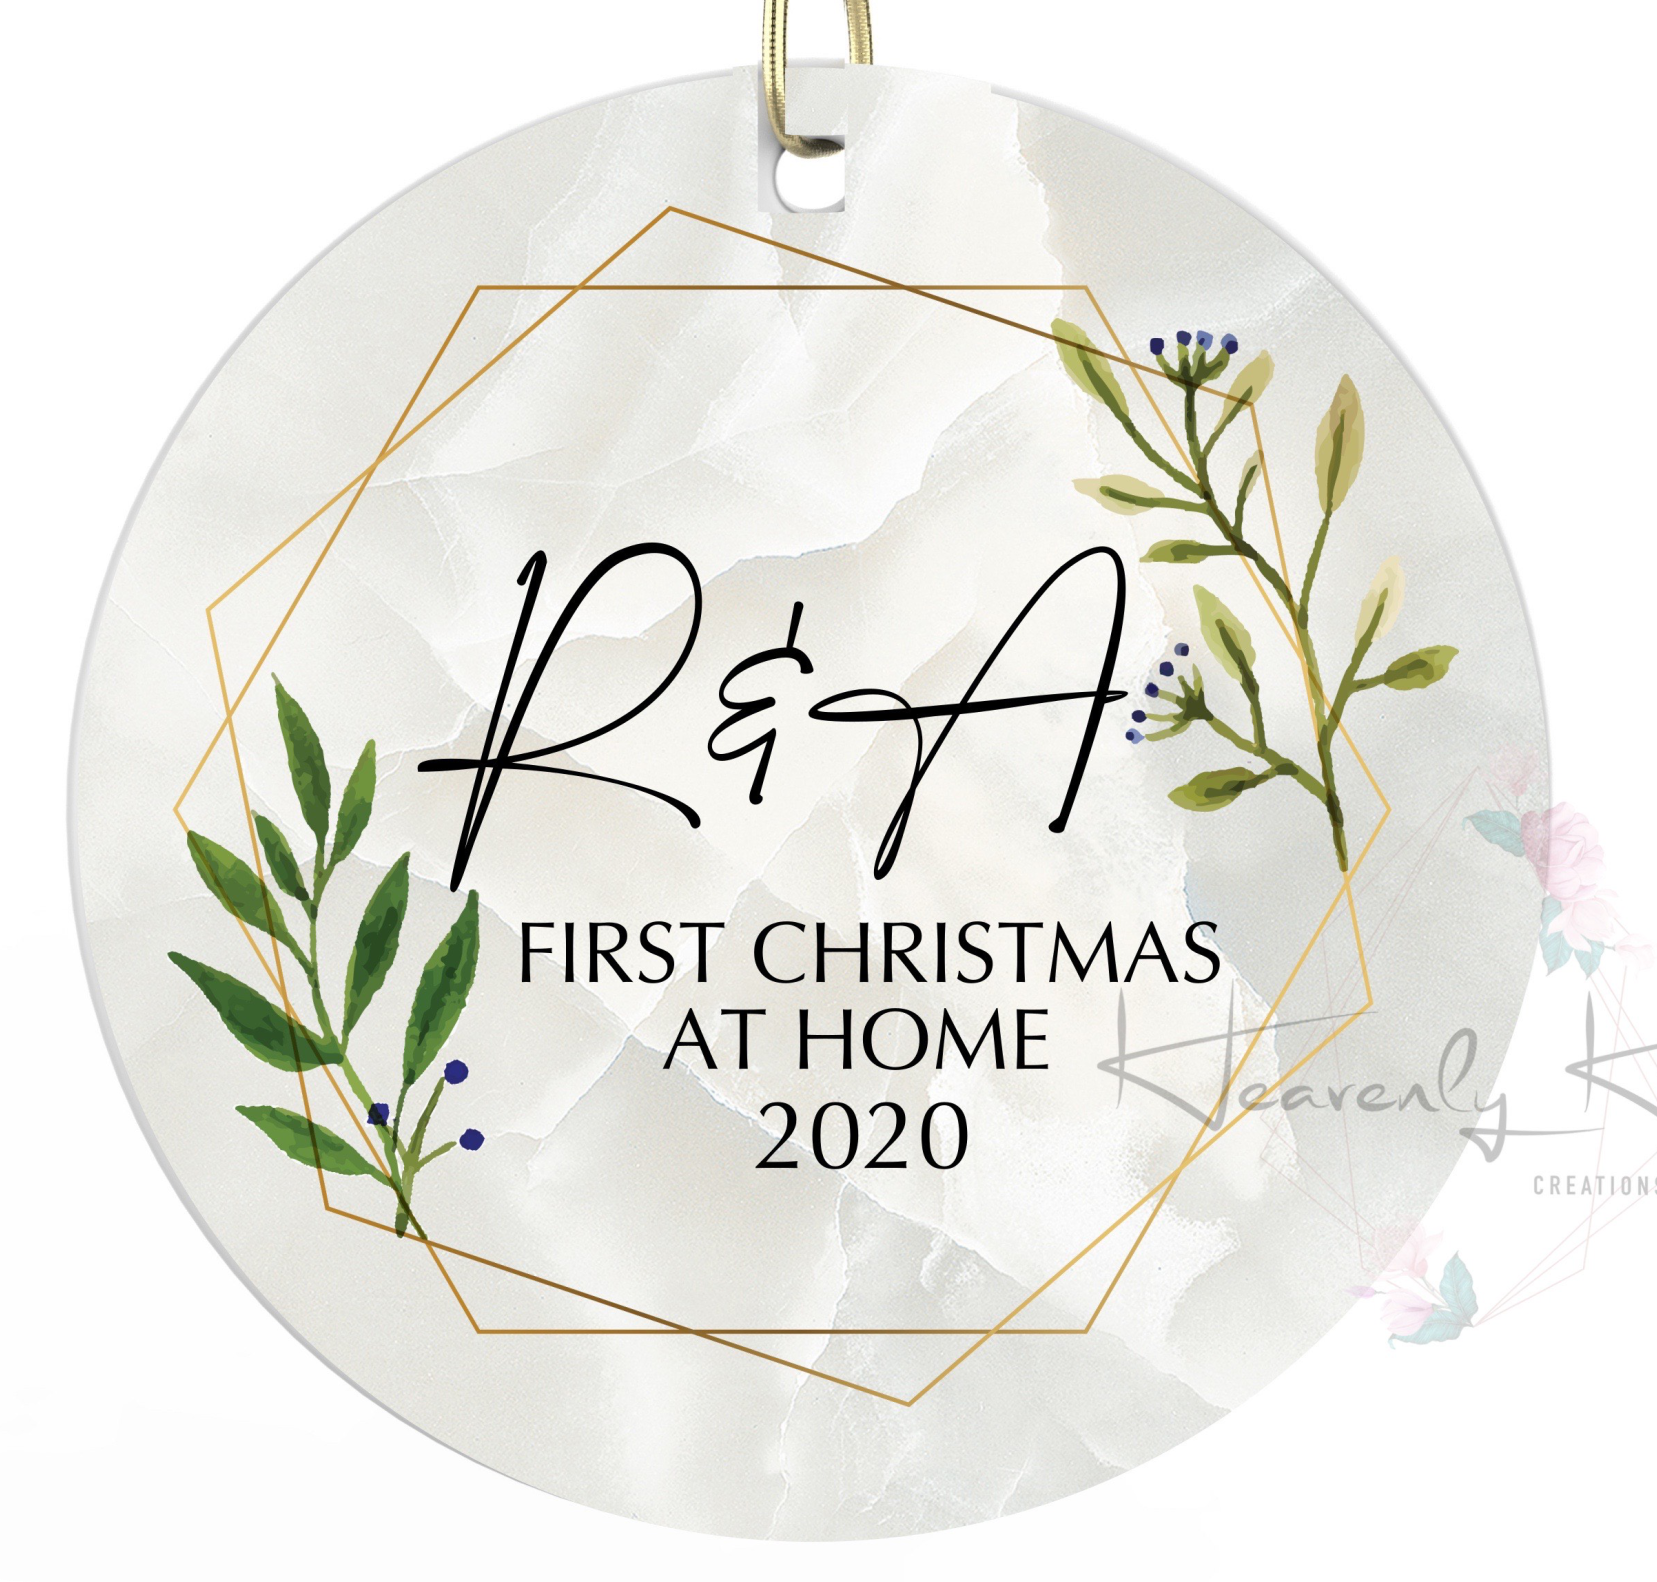 First Christmas at home Round Porcelain Ornament